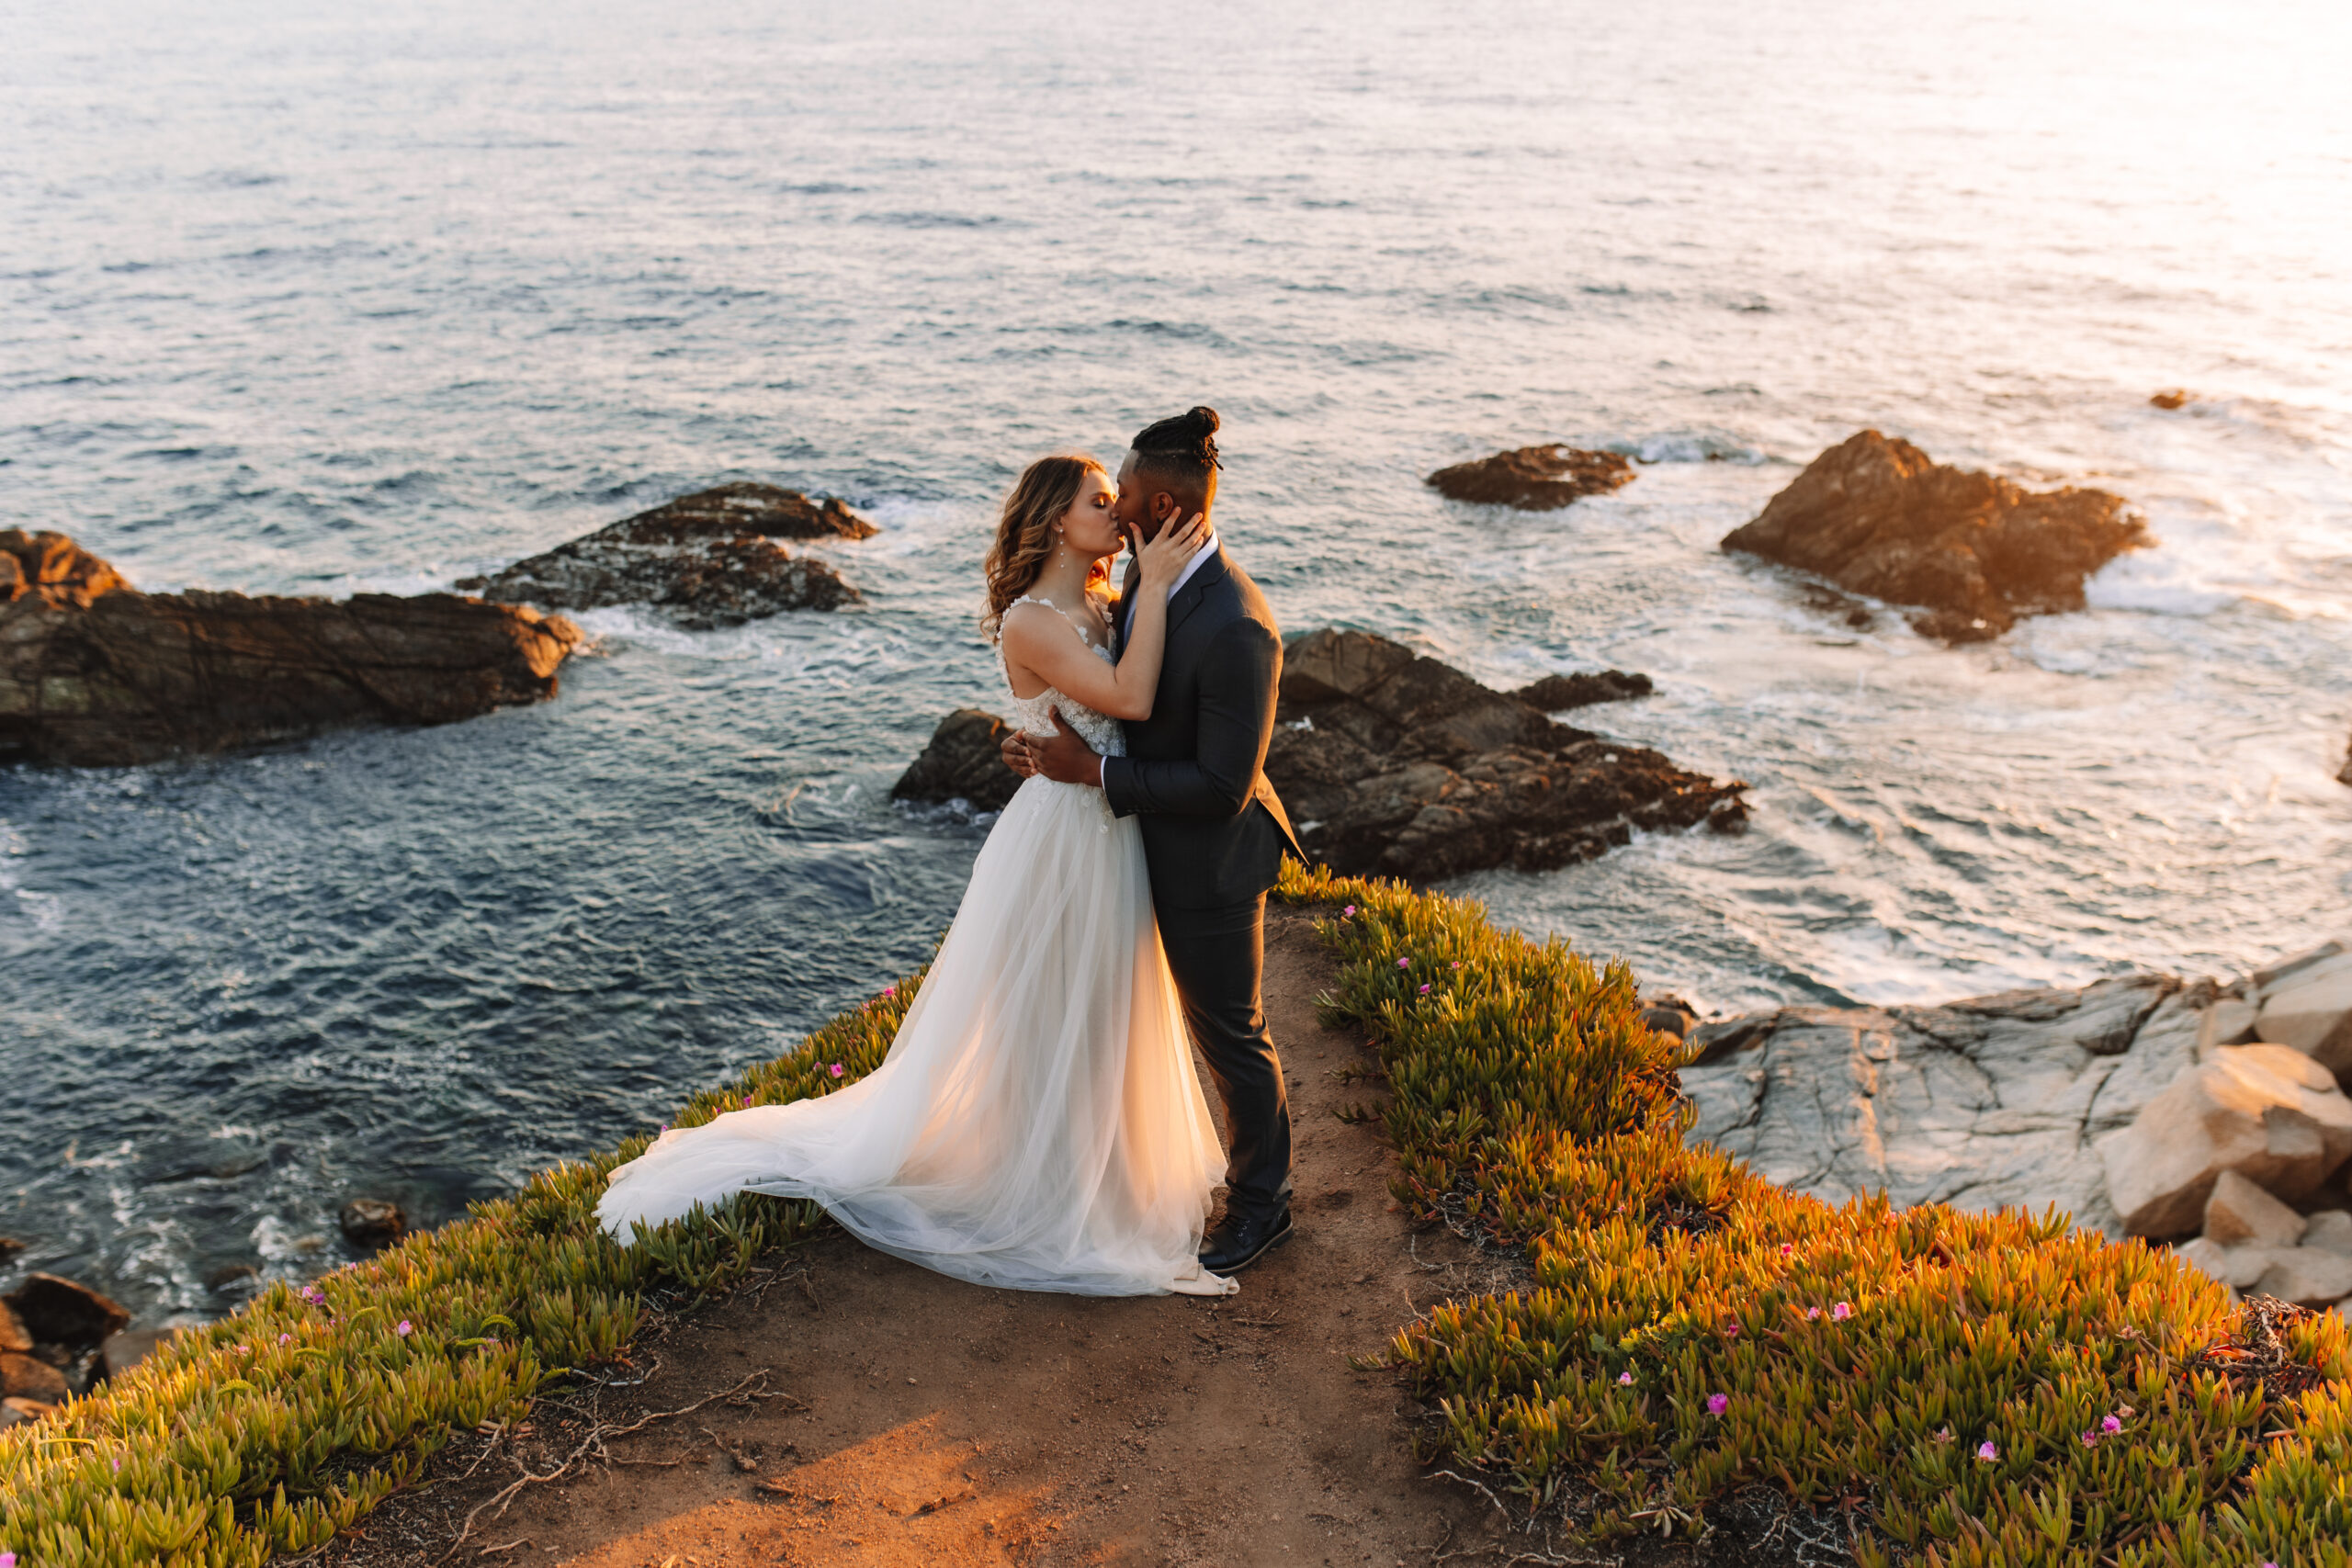 Destination wedding couple standing and kissing at the edge of a cliff on top of chapman's peak in South Africa